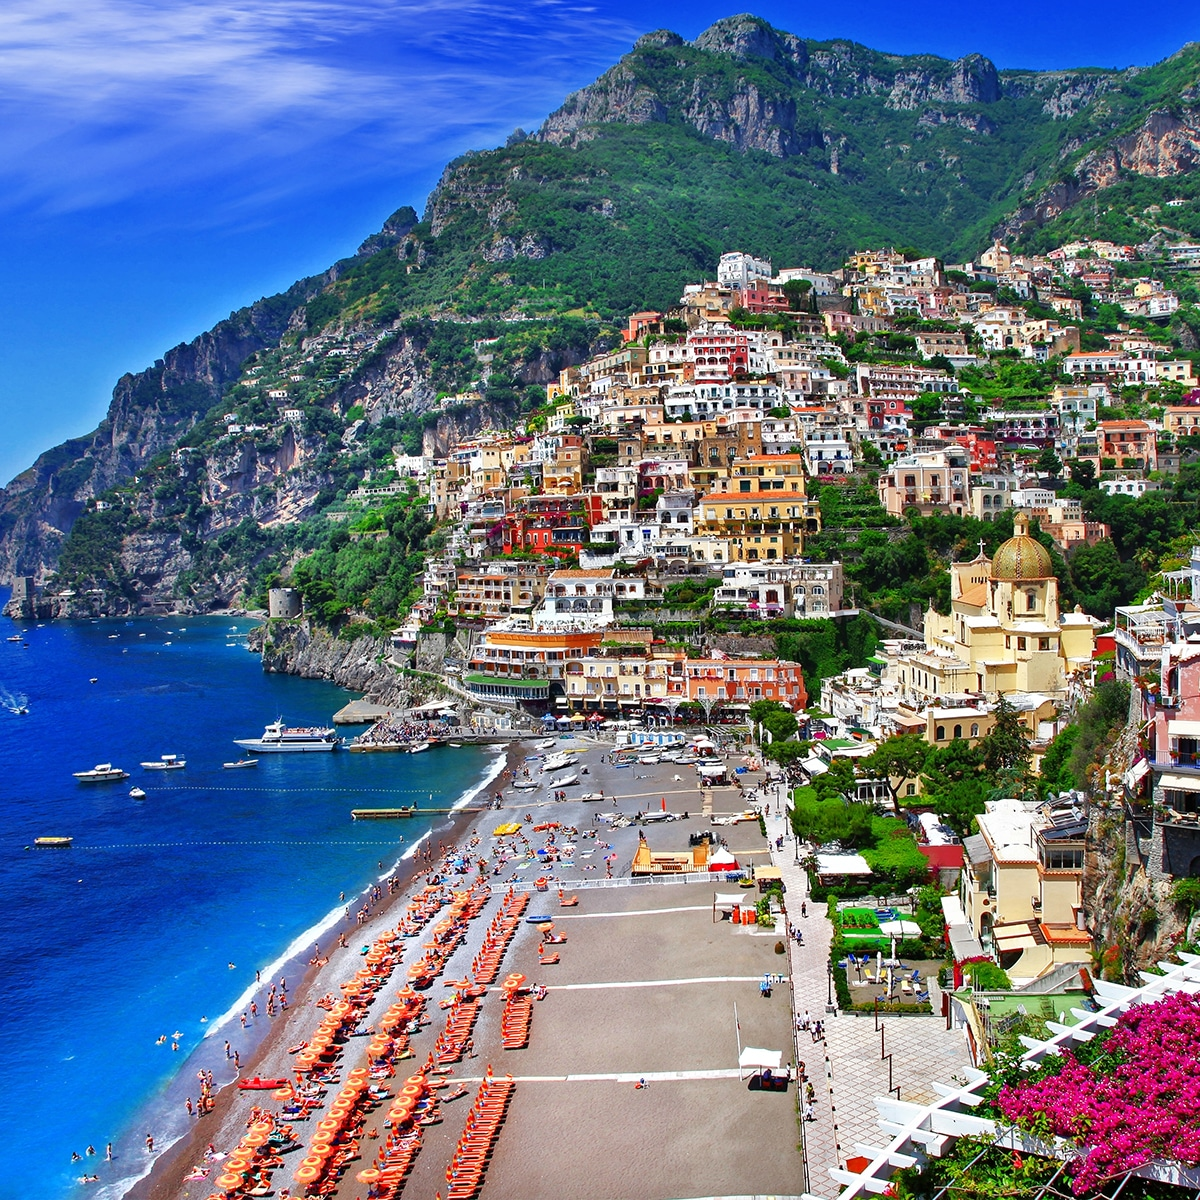 Picture shows the Amalfi Coast view where mountains are visible